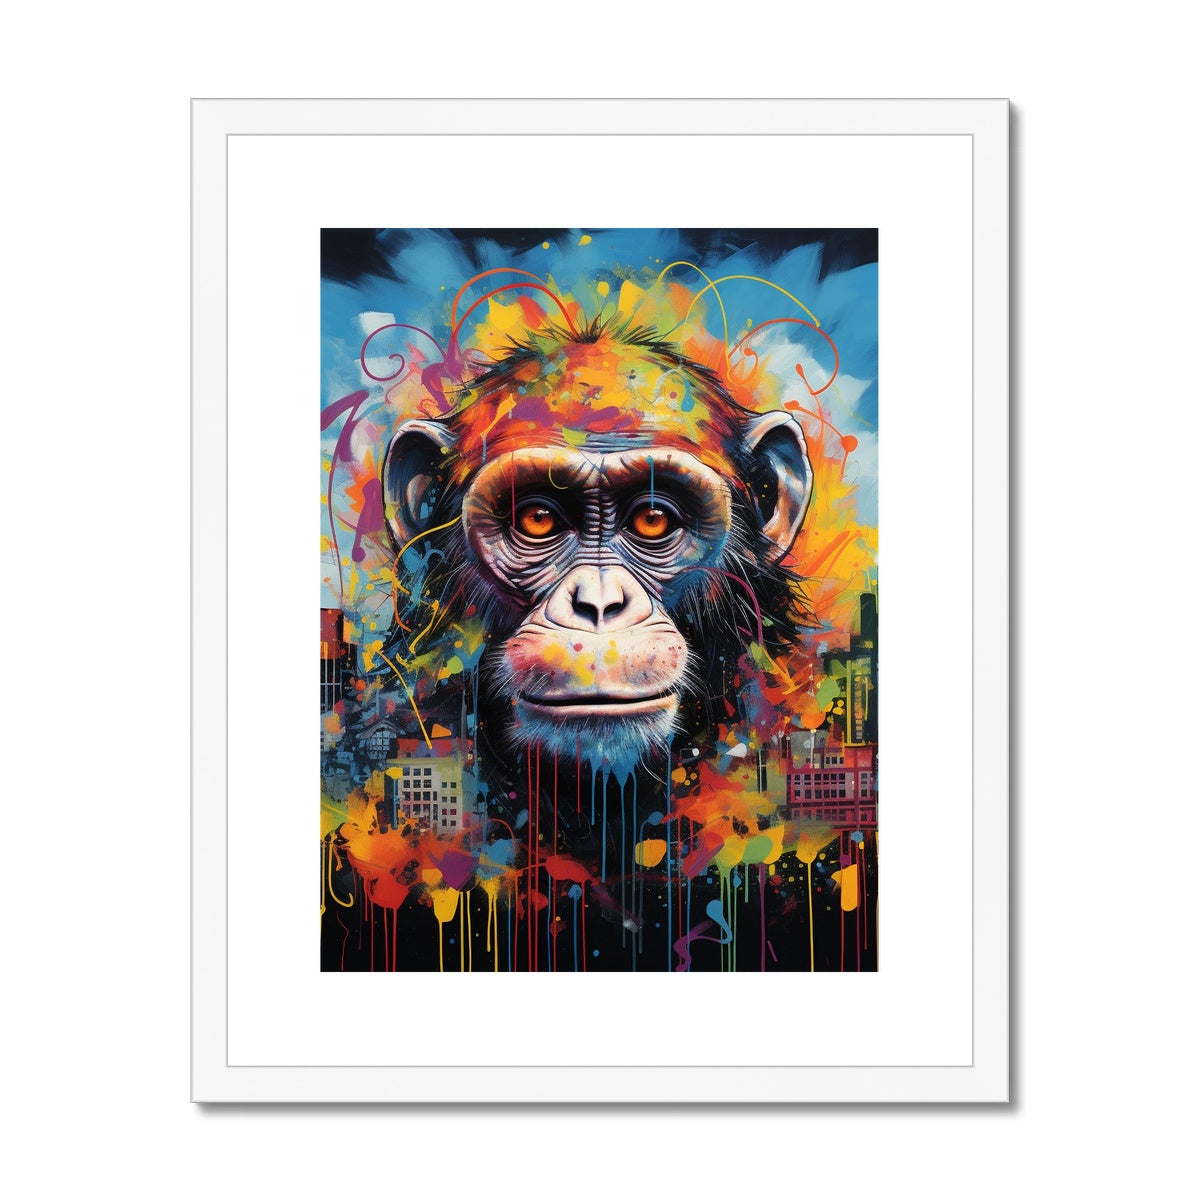 Finger Paint: Limited Edition Framed & Mounted Print